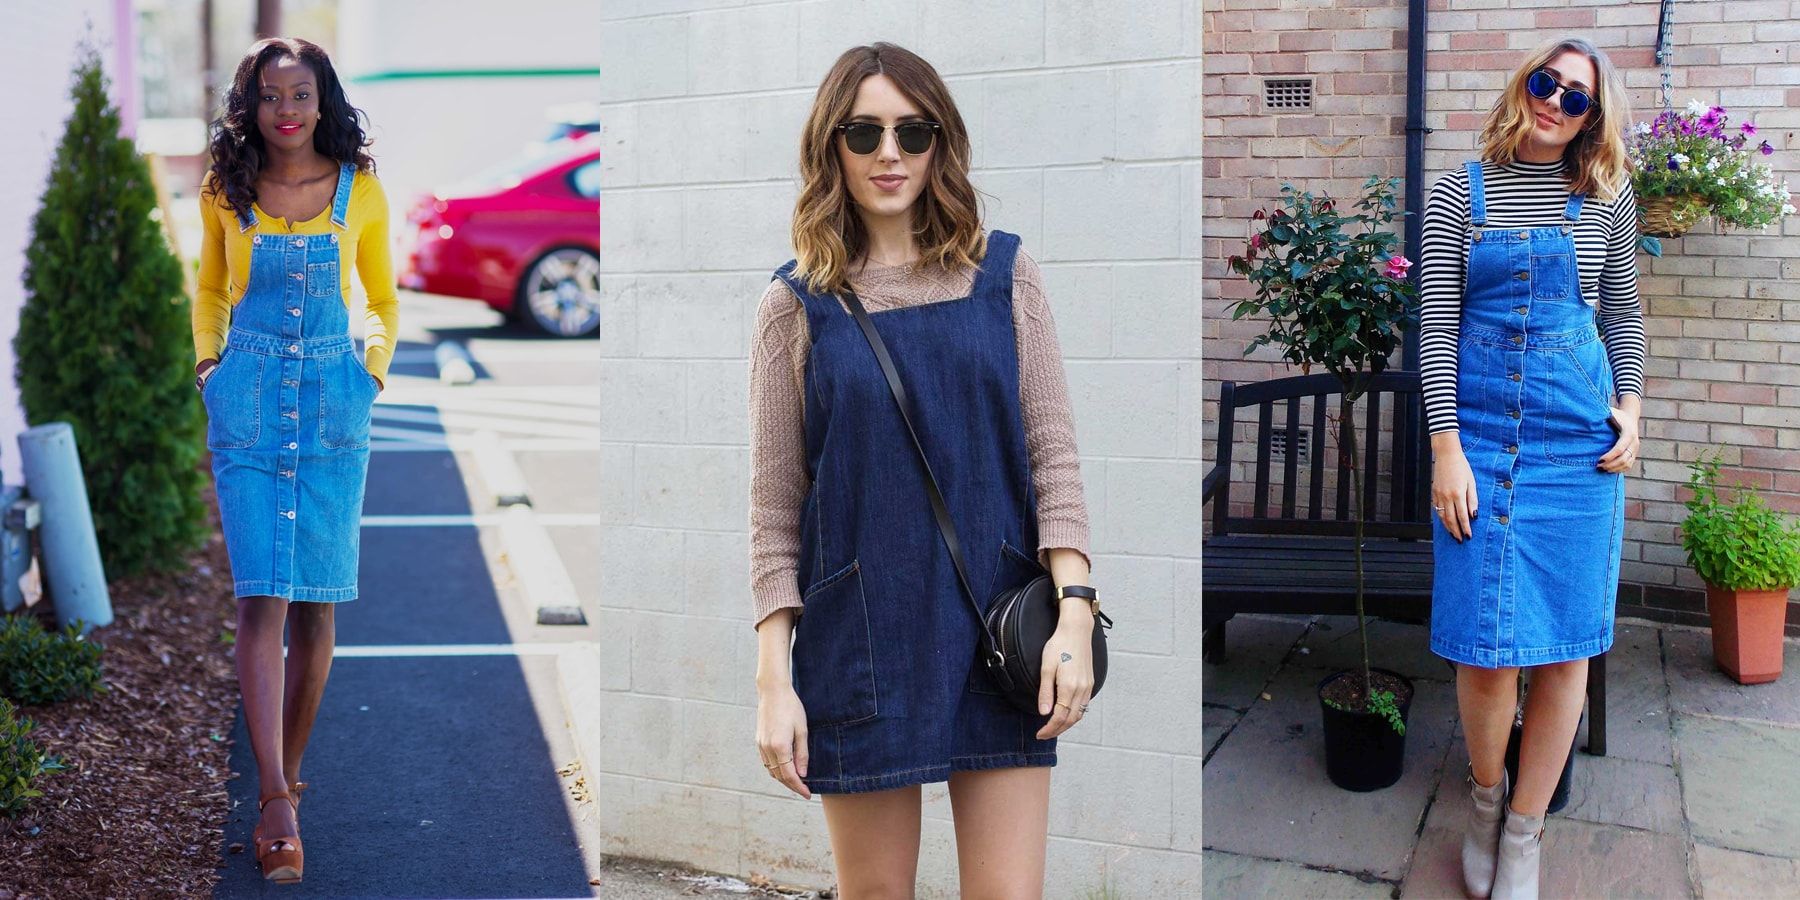 Come on, Look Casual and Chic with a Denim Dress!